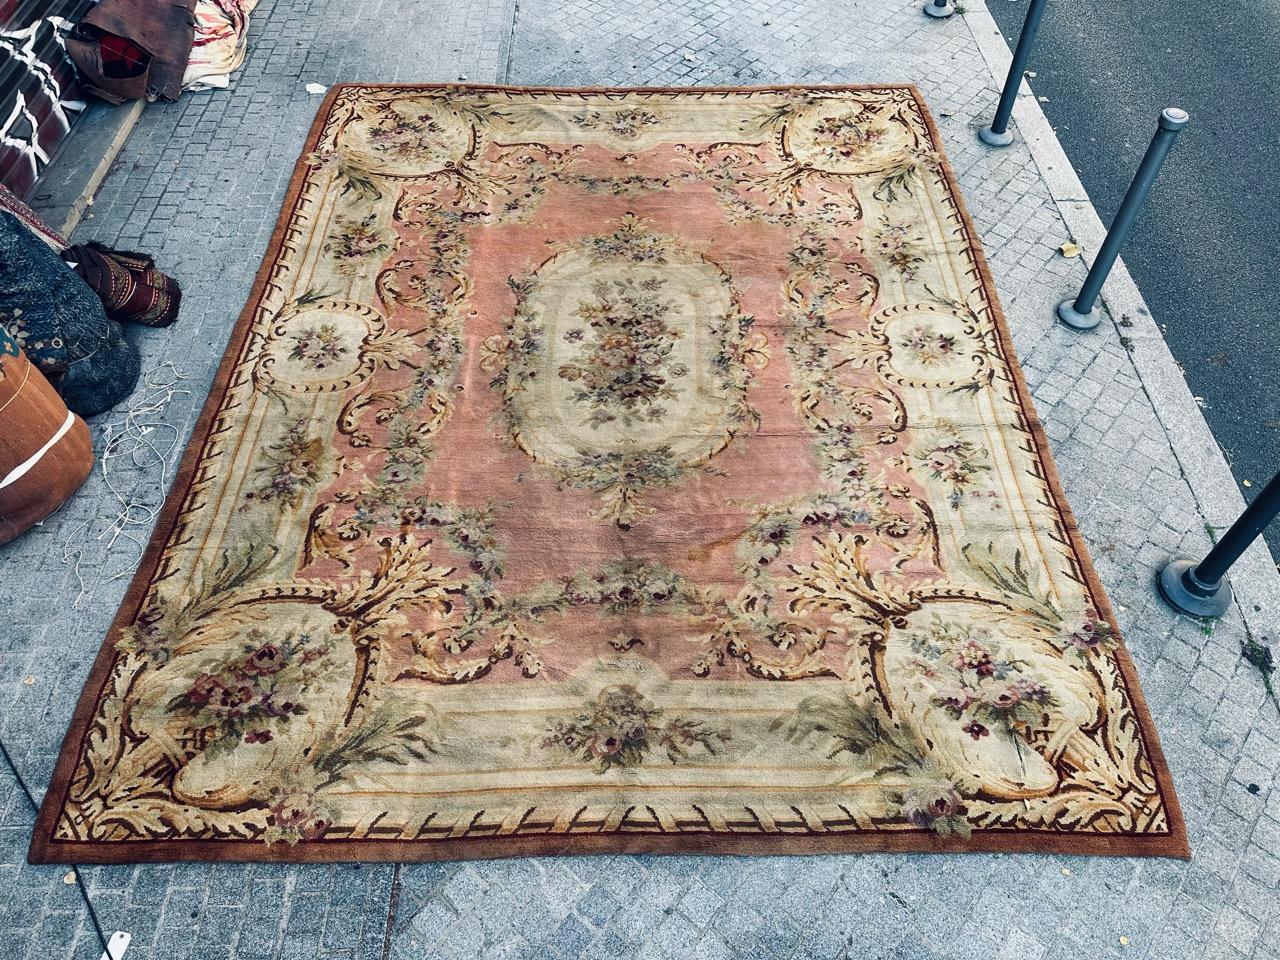 Very beautiful 19th century large french savonnerie rug with beautiful floral Napoleon the third design and nice natural colors with a pink field color, entirely hand knotted with wool velvet on cotton and jute foundation.

✨✨✨
